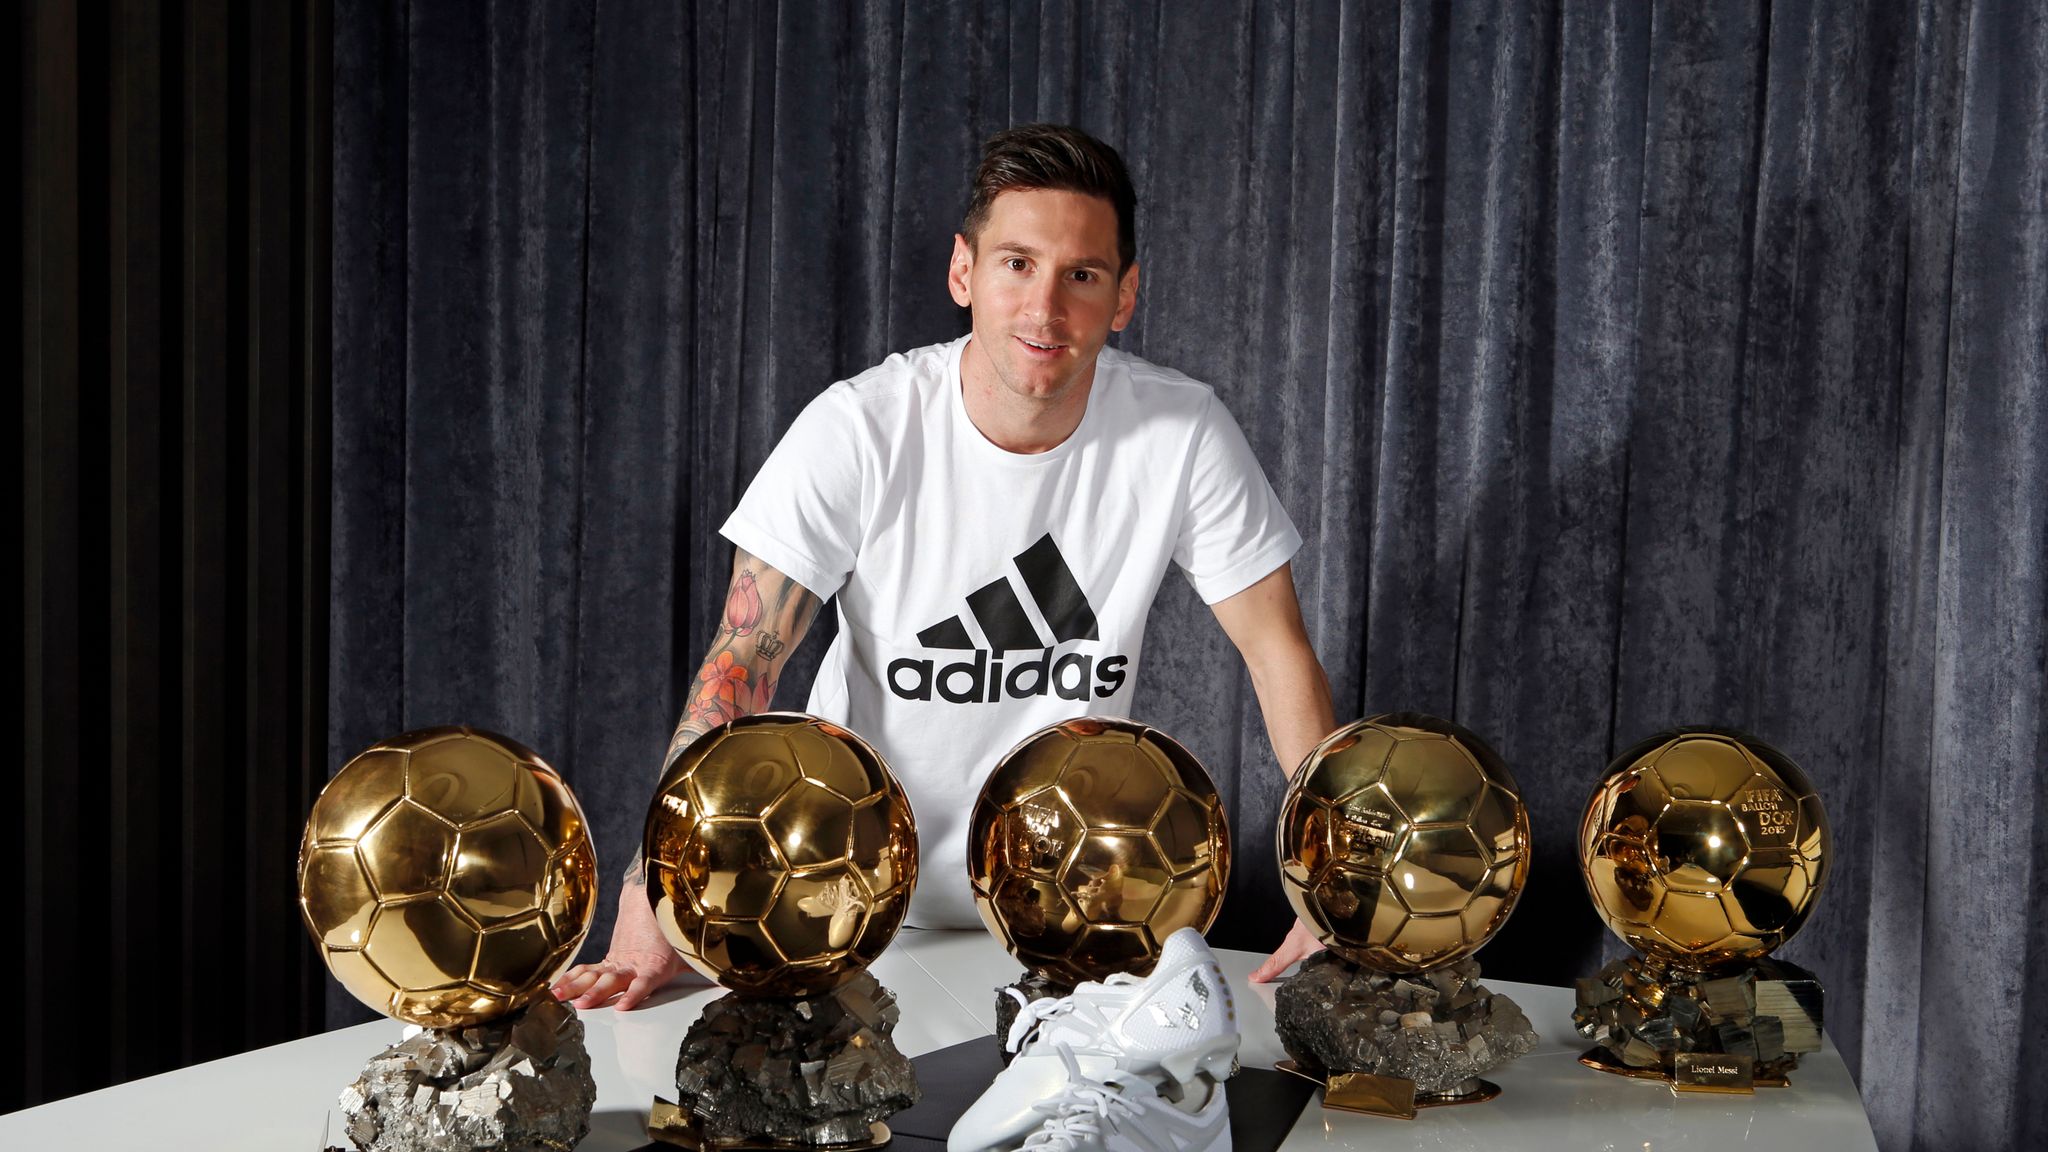 lezing Opa strottenhoofd Five-time Ballon d'Or winner Lionel Messi receives platinum boot from adidas  | Football News | Sky Sports